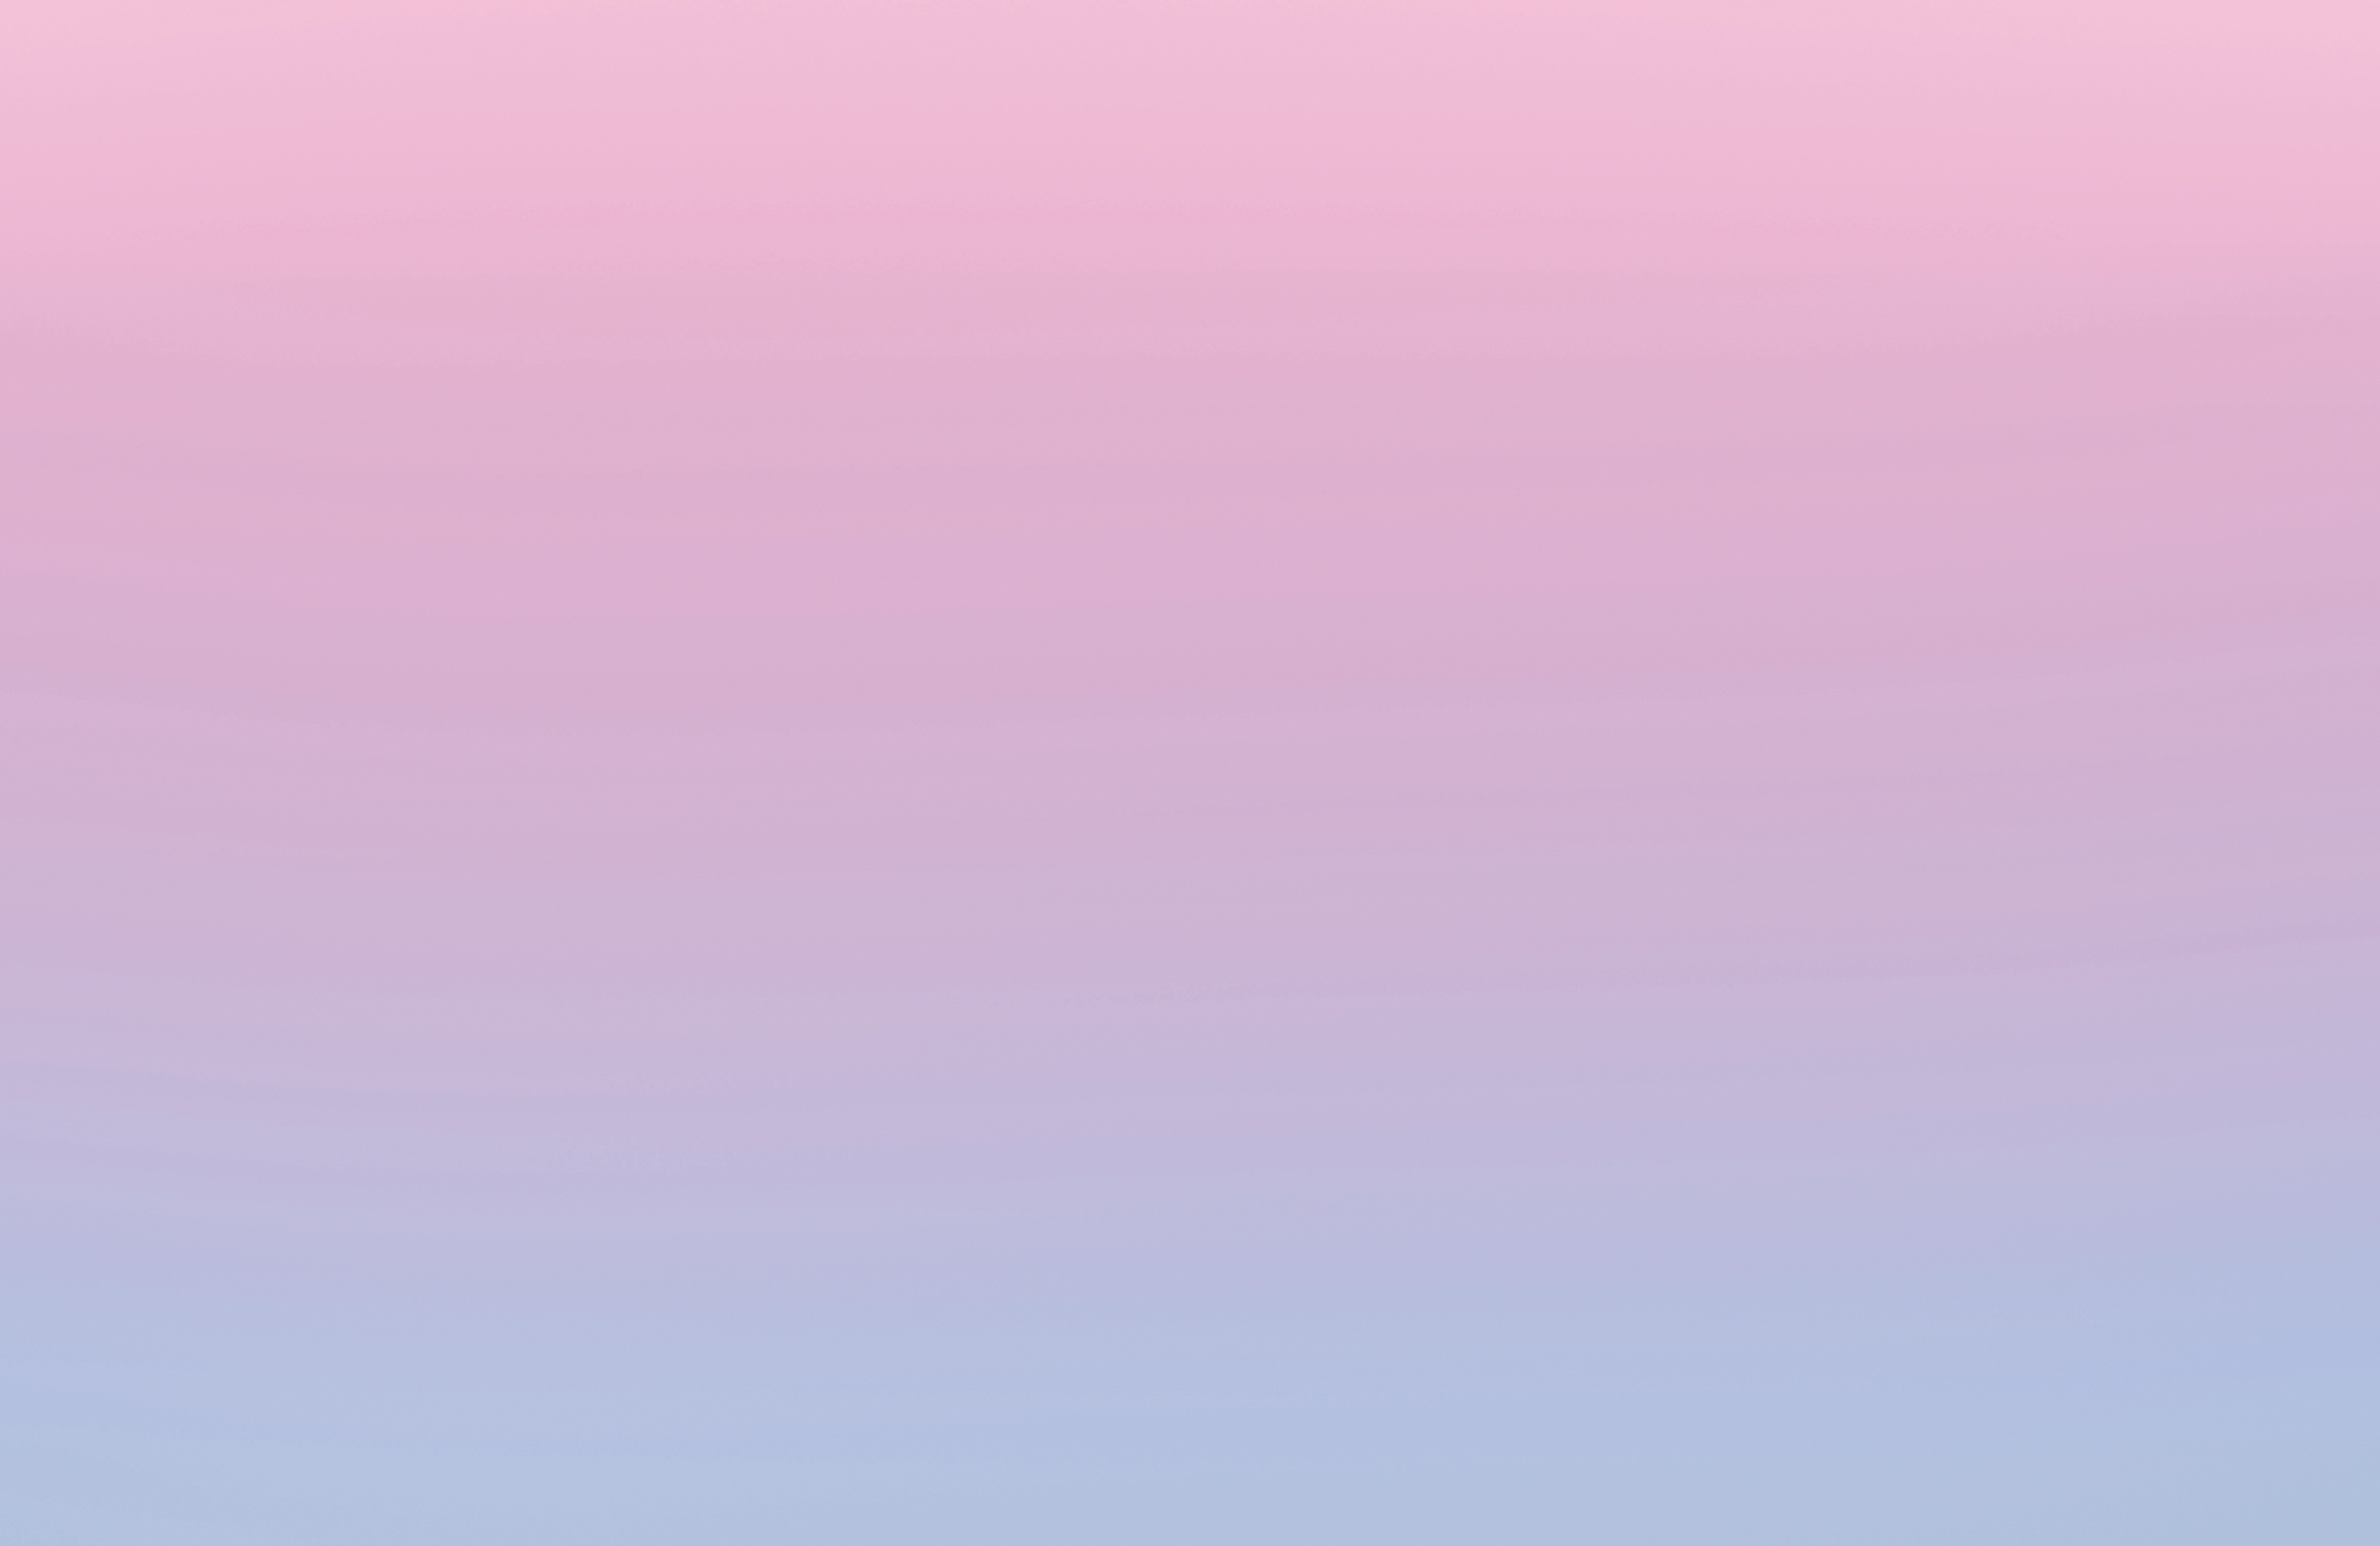 Rose Quartz And Serenity Blue Mural Your Way